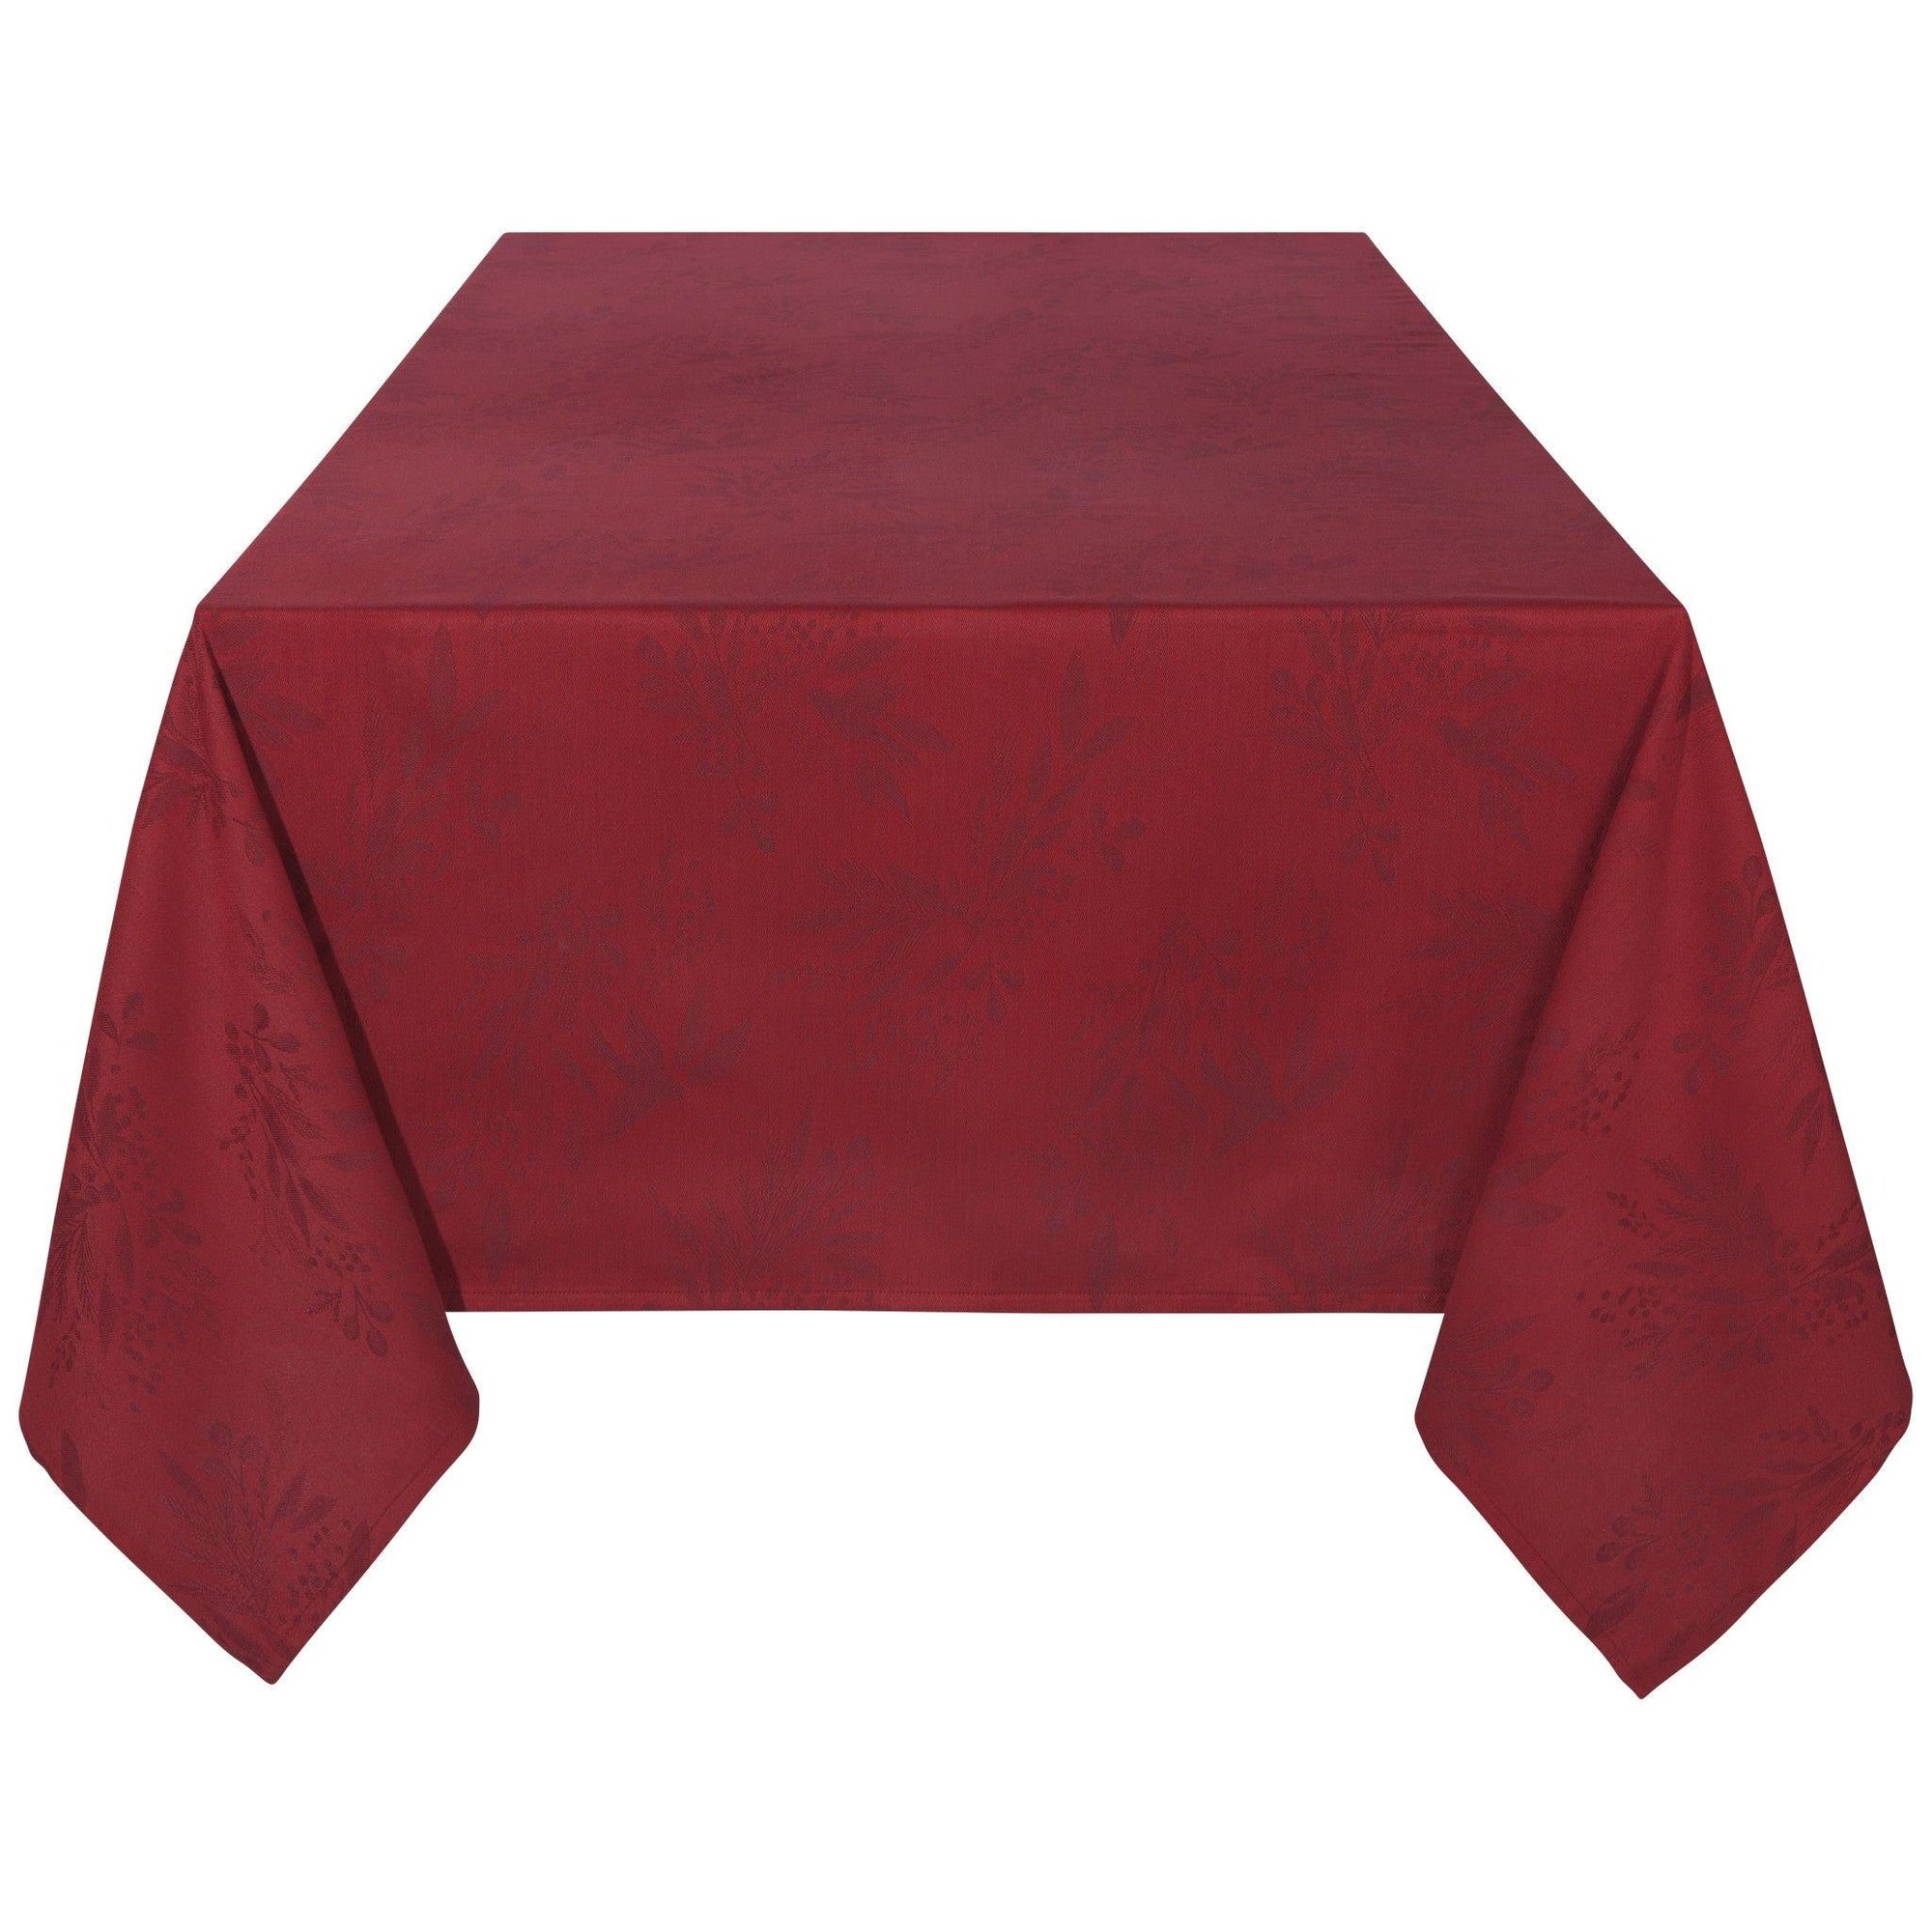 Danica Heirloom Tablecloth 60" x 90" Red Wintersong Jacquard